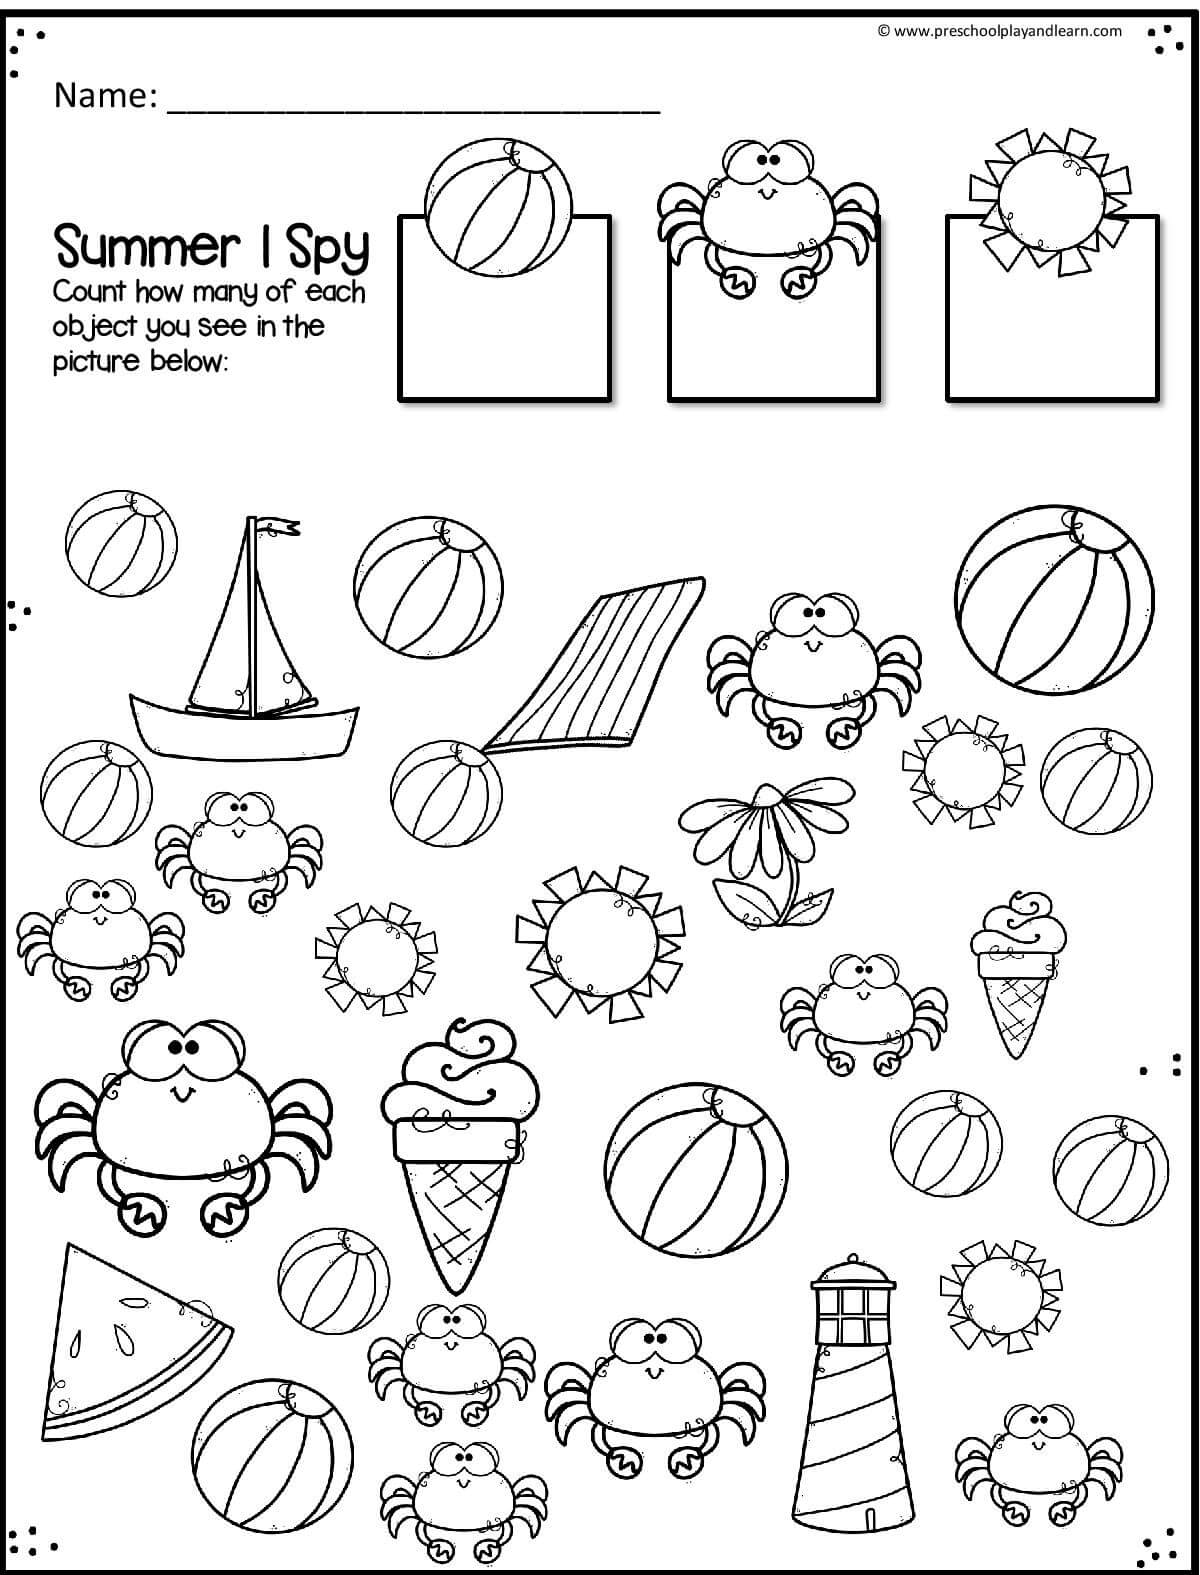 summer graphing summer math worksheets and activities for preschool